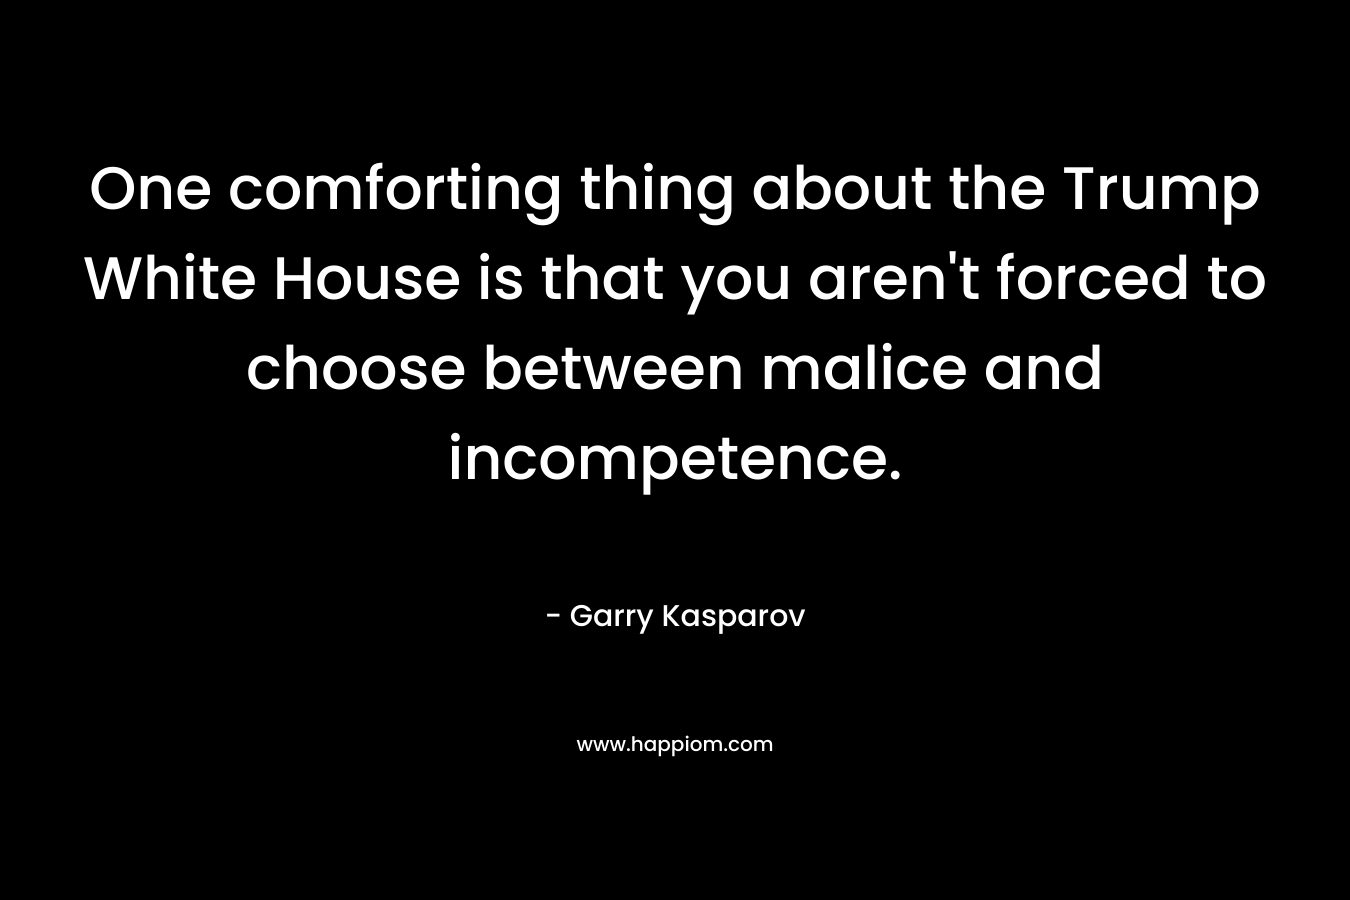 One comforting thing about the Trump White House is that you aren’t forced to choose between malice and incompetence. – Garry Kasparov